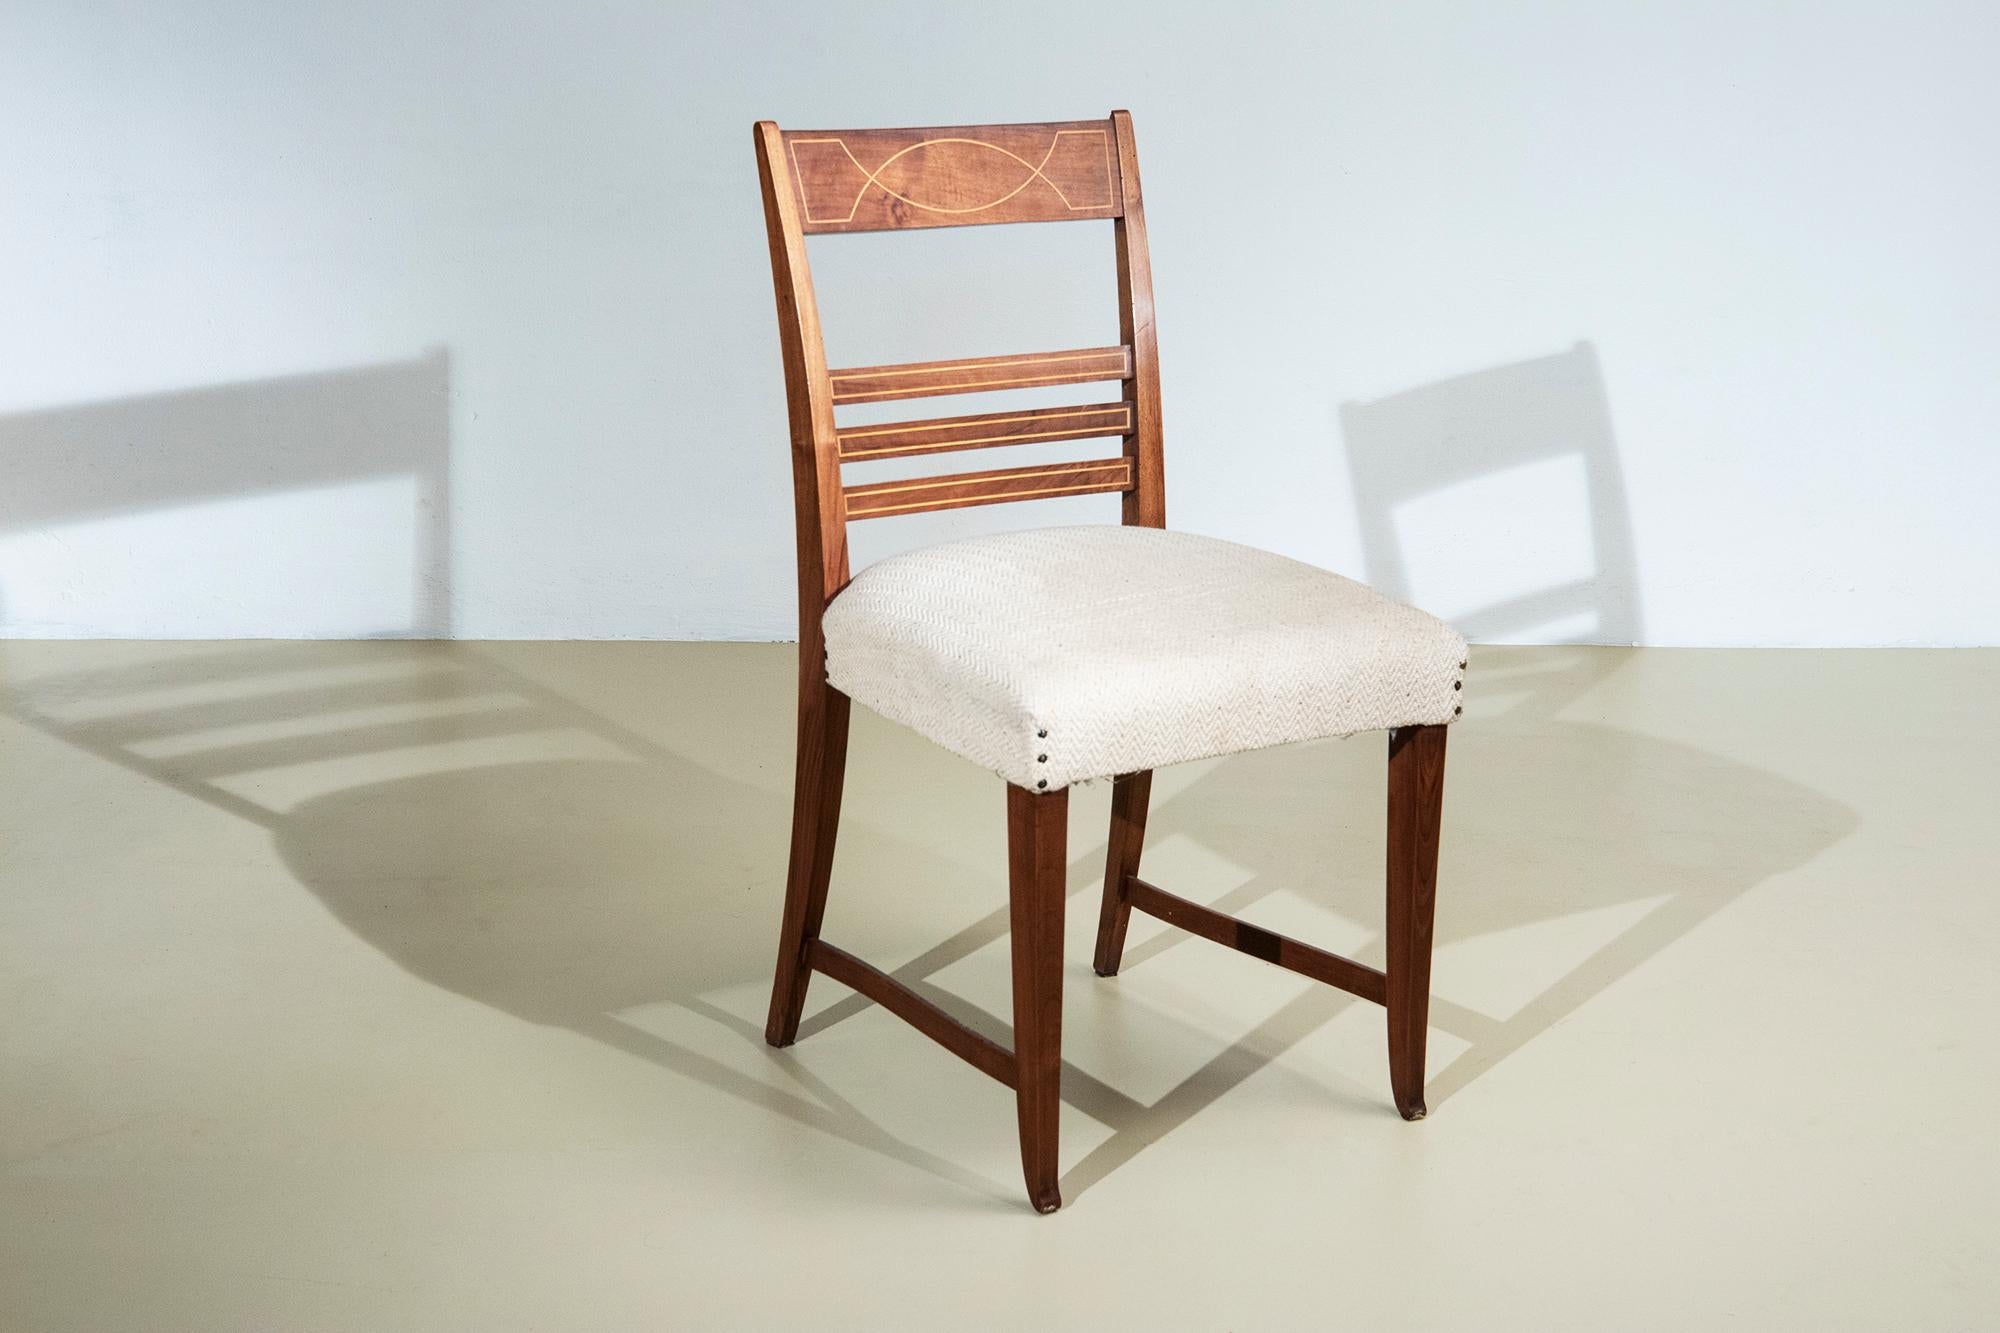 Paolo Buffa, Set of Six Chairs
Six wooden chairs designed by Paolo Buffa,  with geometric decoration inlaid in the backrest, seat upholstered in fabric in shades of white.
Produced by Moses Turri, Italy, ca. 1950

Bibliography:
Eredi Marelli, Paolo